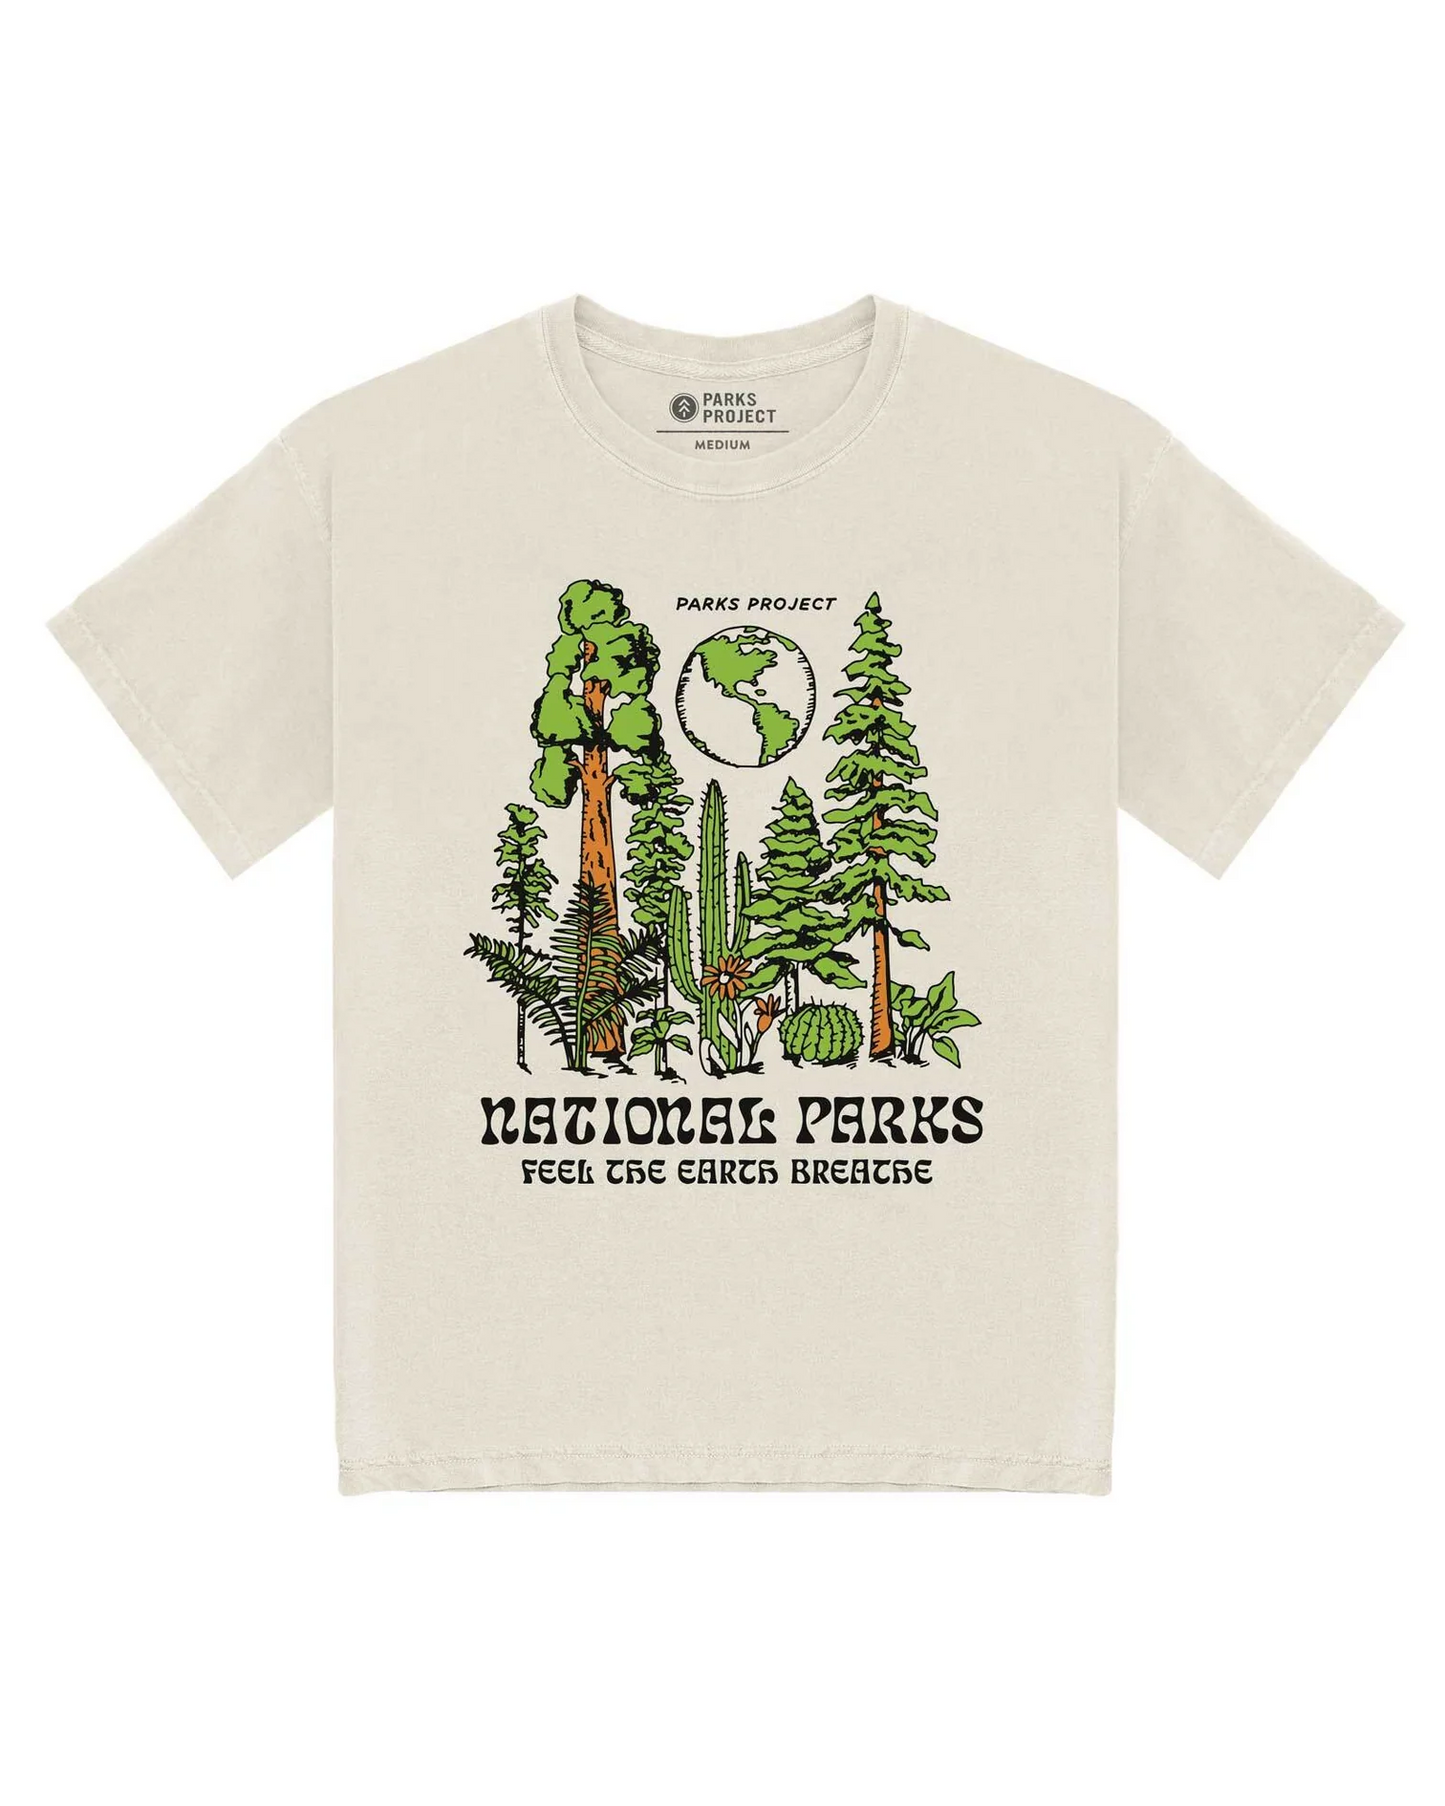 Parks Project Feel The Earth Breathe Tee